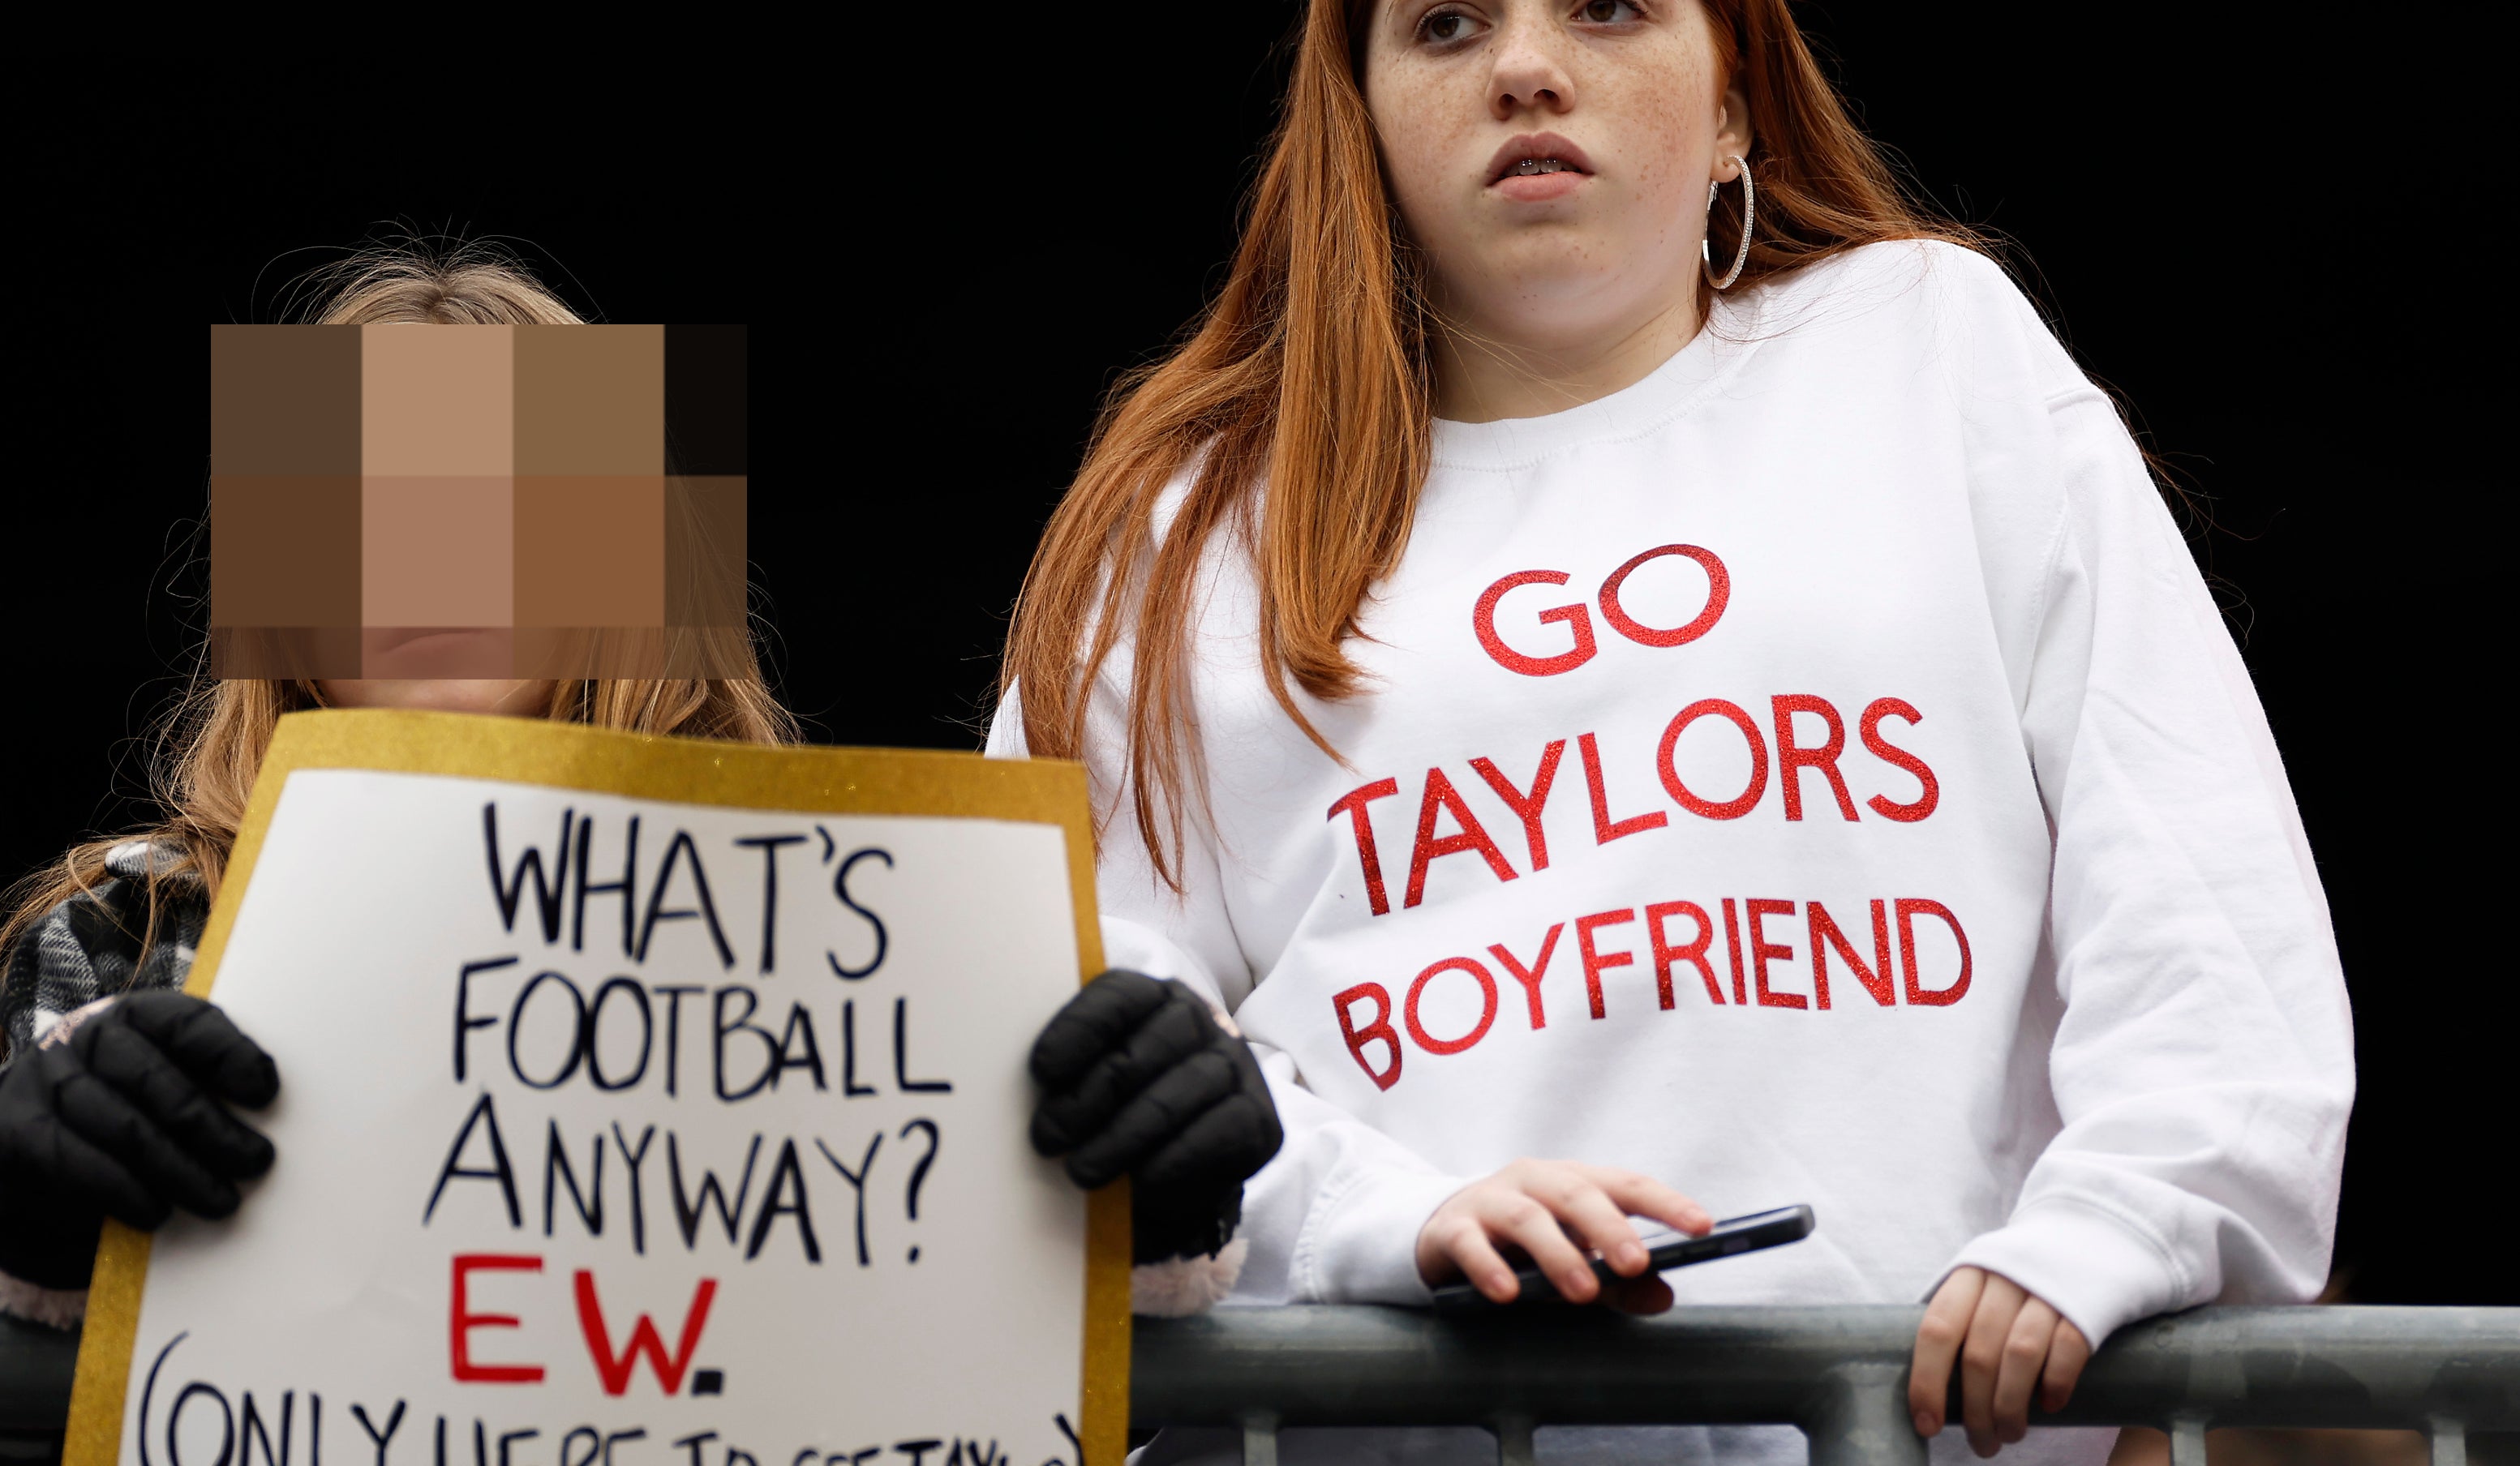 Close-up of someone holding the sign &quot;What&#x27;s football anyway? EW (only here to see Taylor)&quot; and someone wearing a &quot;Go Taylors boyfriend&quot; sweatshirt